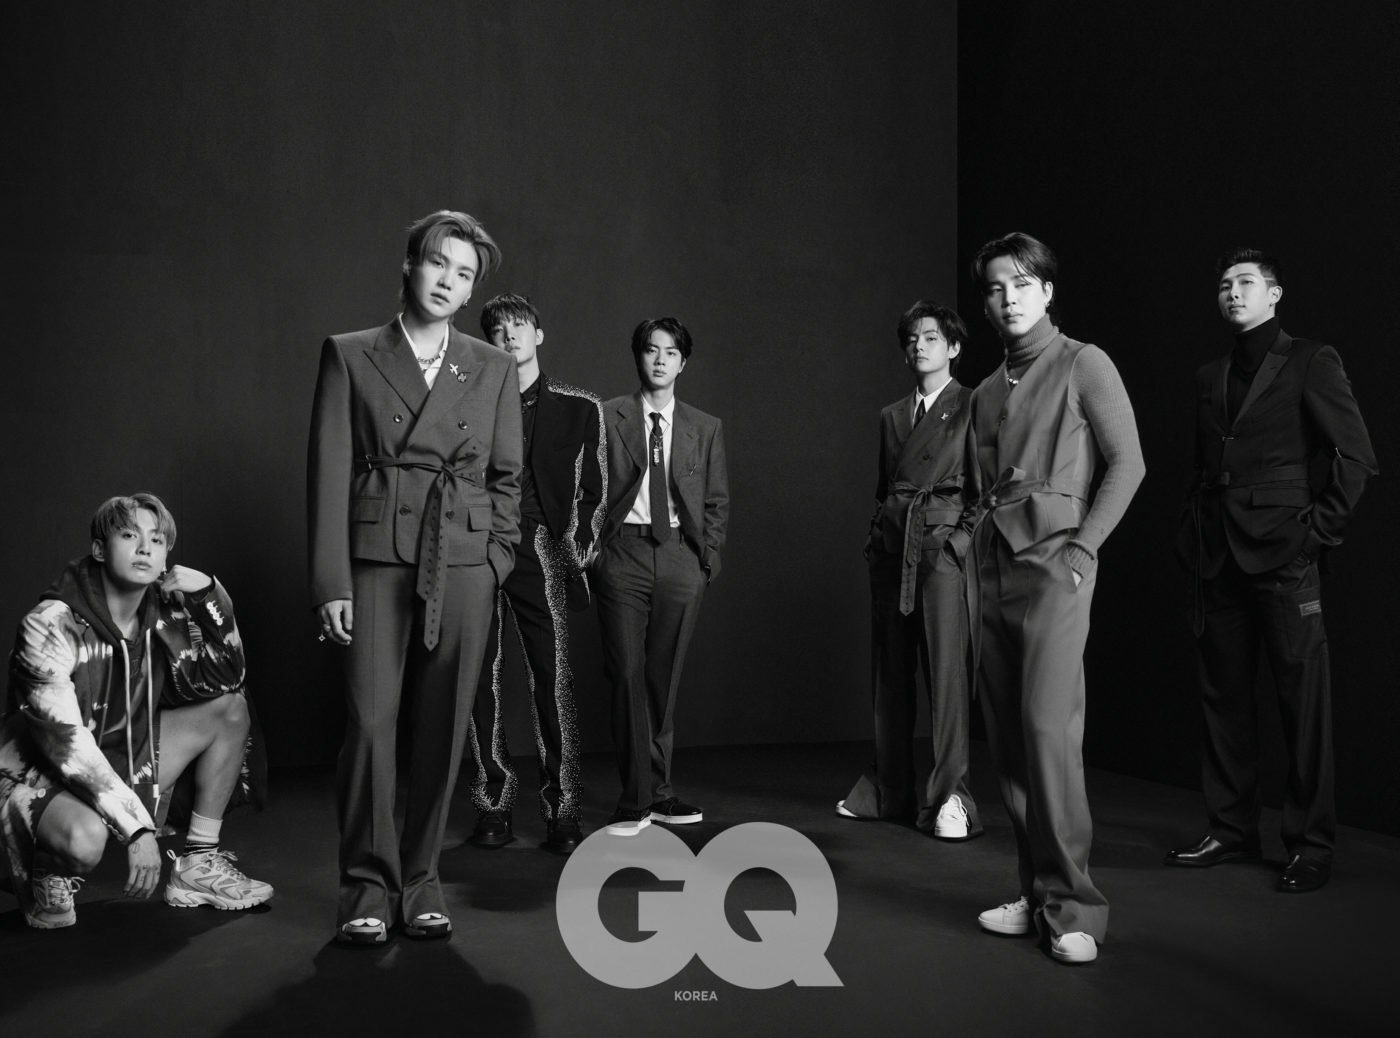 MAGAZINE] BTS X LV by Vogue, GQ (Special January 2022 Issue) — US BTS ARMY